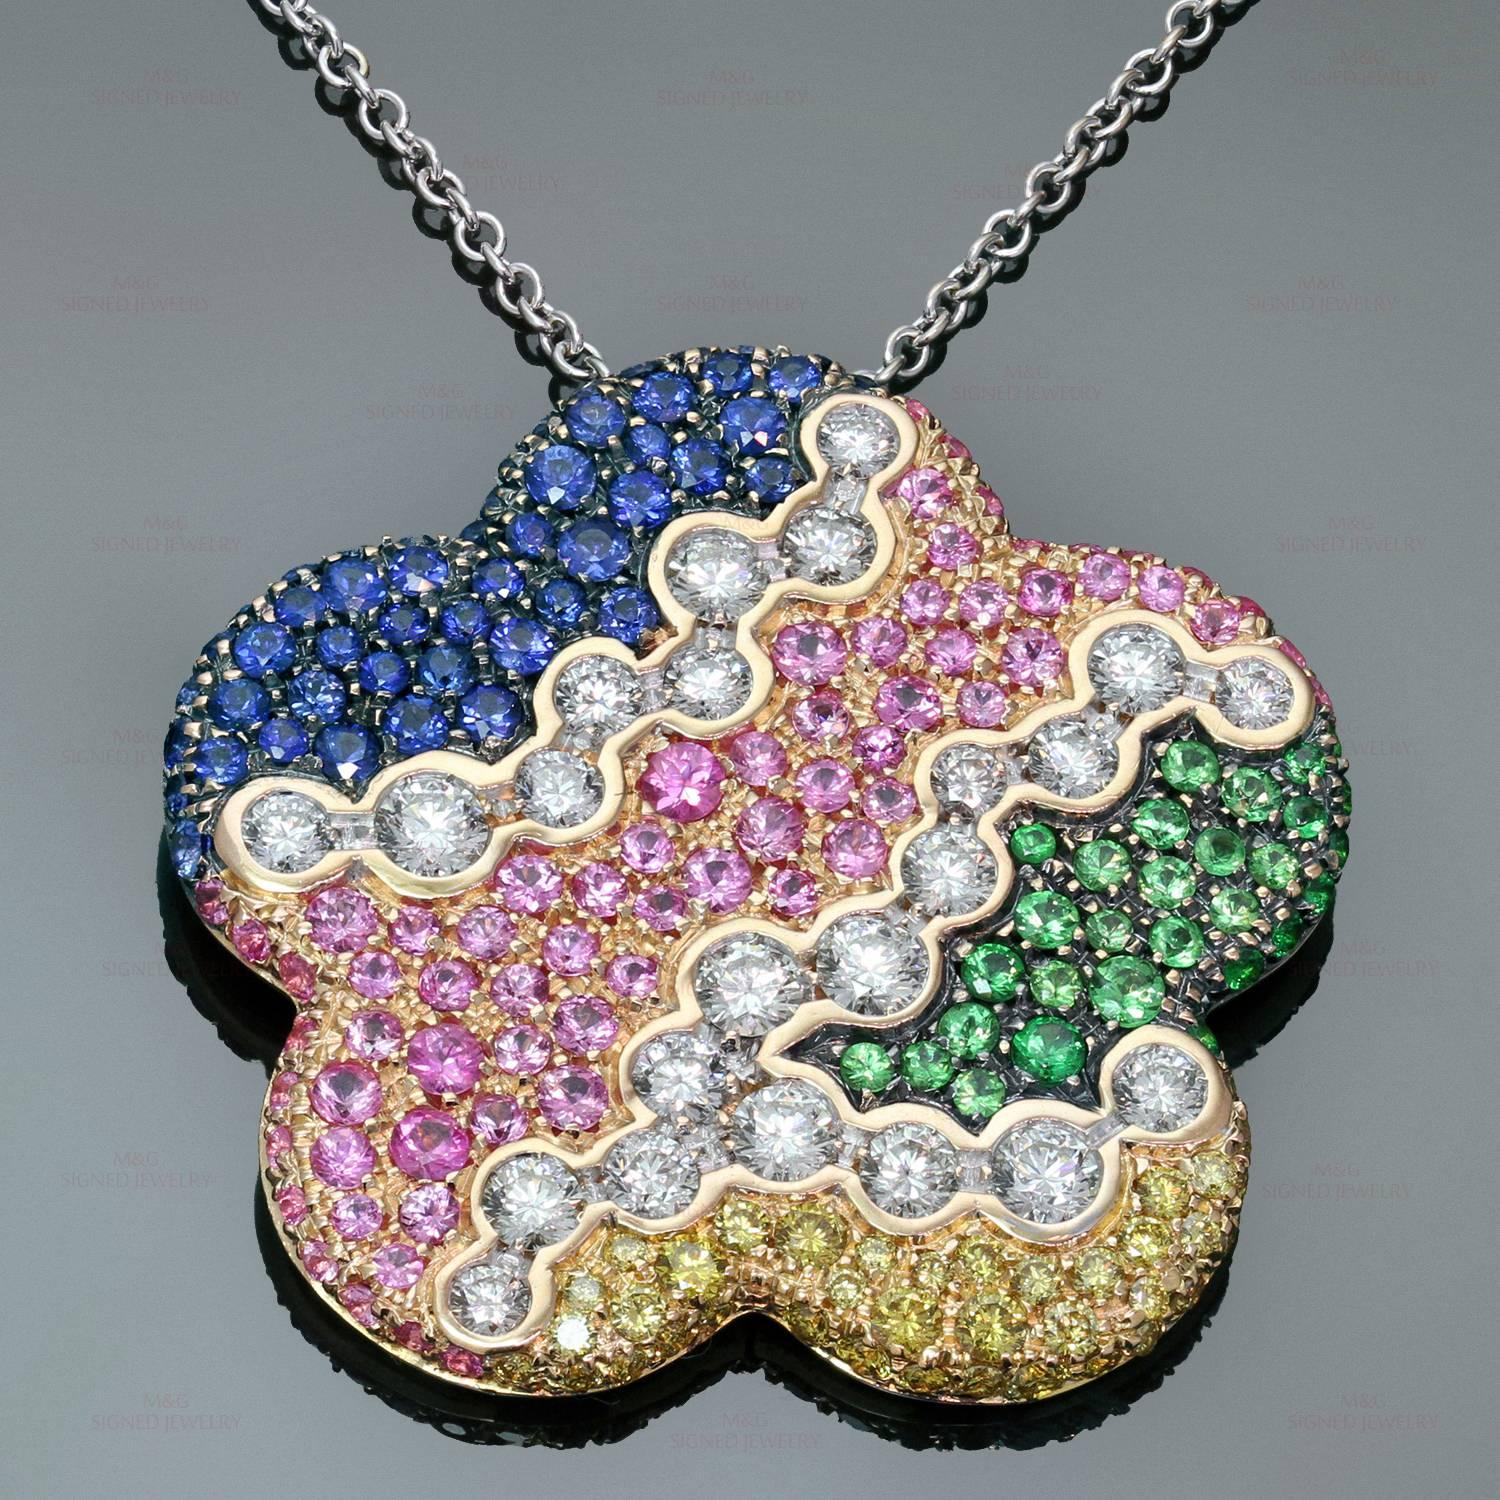 This stunning pendant necklace by Luca Cara features a colorful floral design crafted in 18k rose, white & yellow gold and ornately set with 38 yellow diamonds (about 0.90 carats), 23 white diamonds (about 1.75 carats), 69 pink sapphires, 51 blue